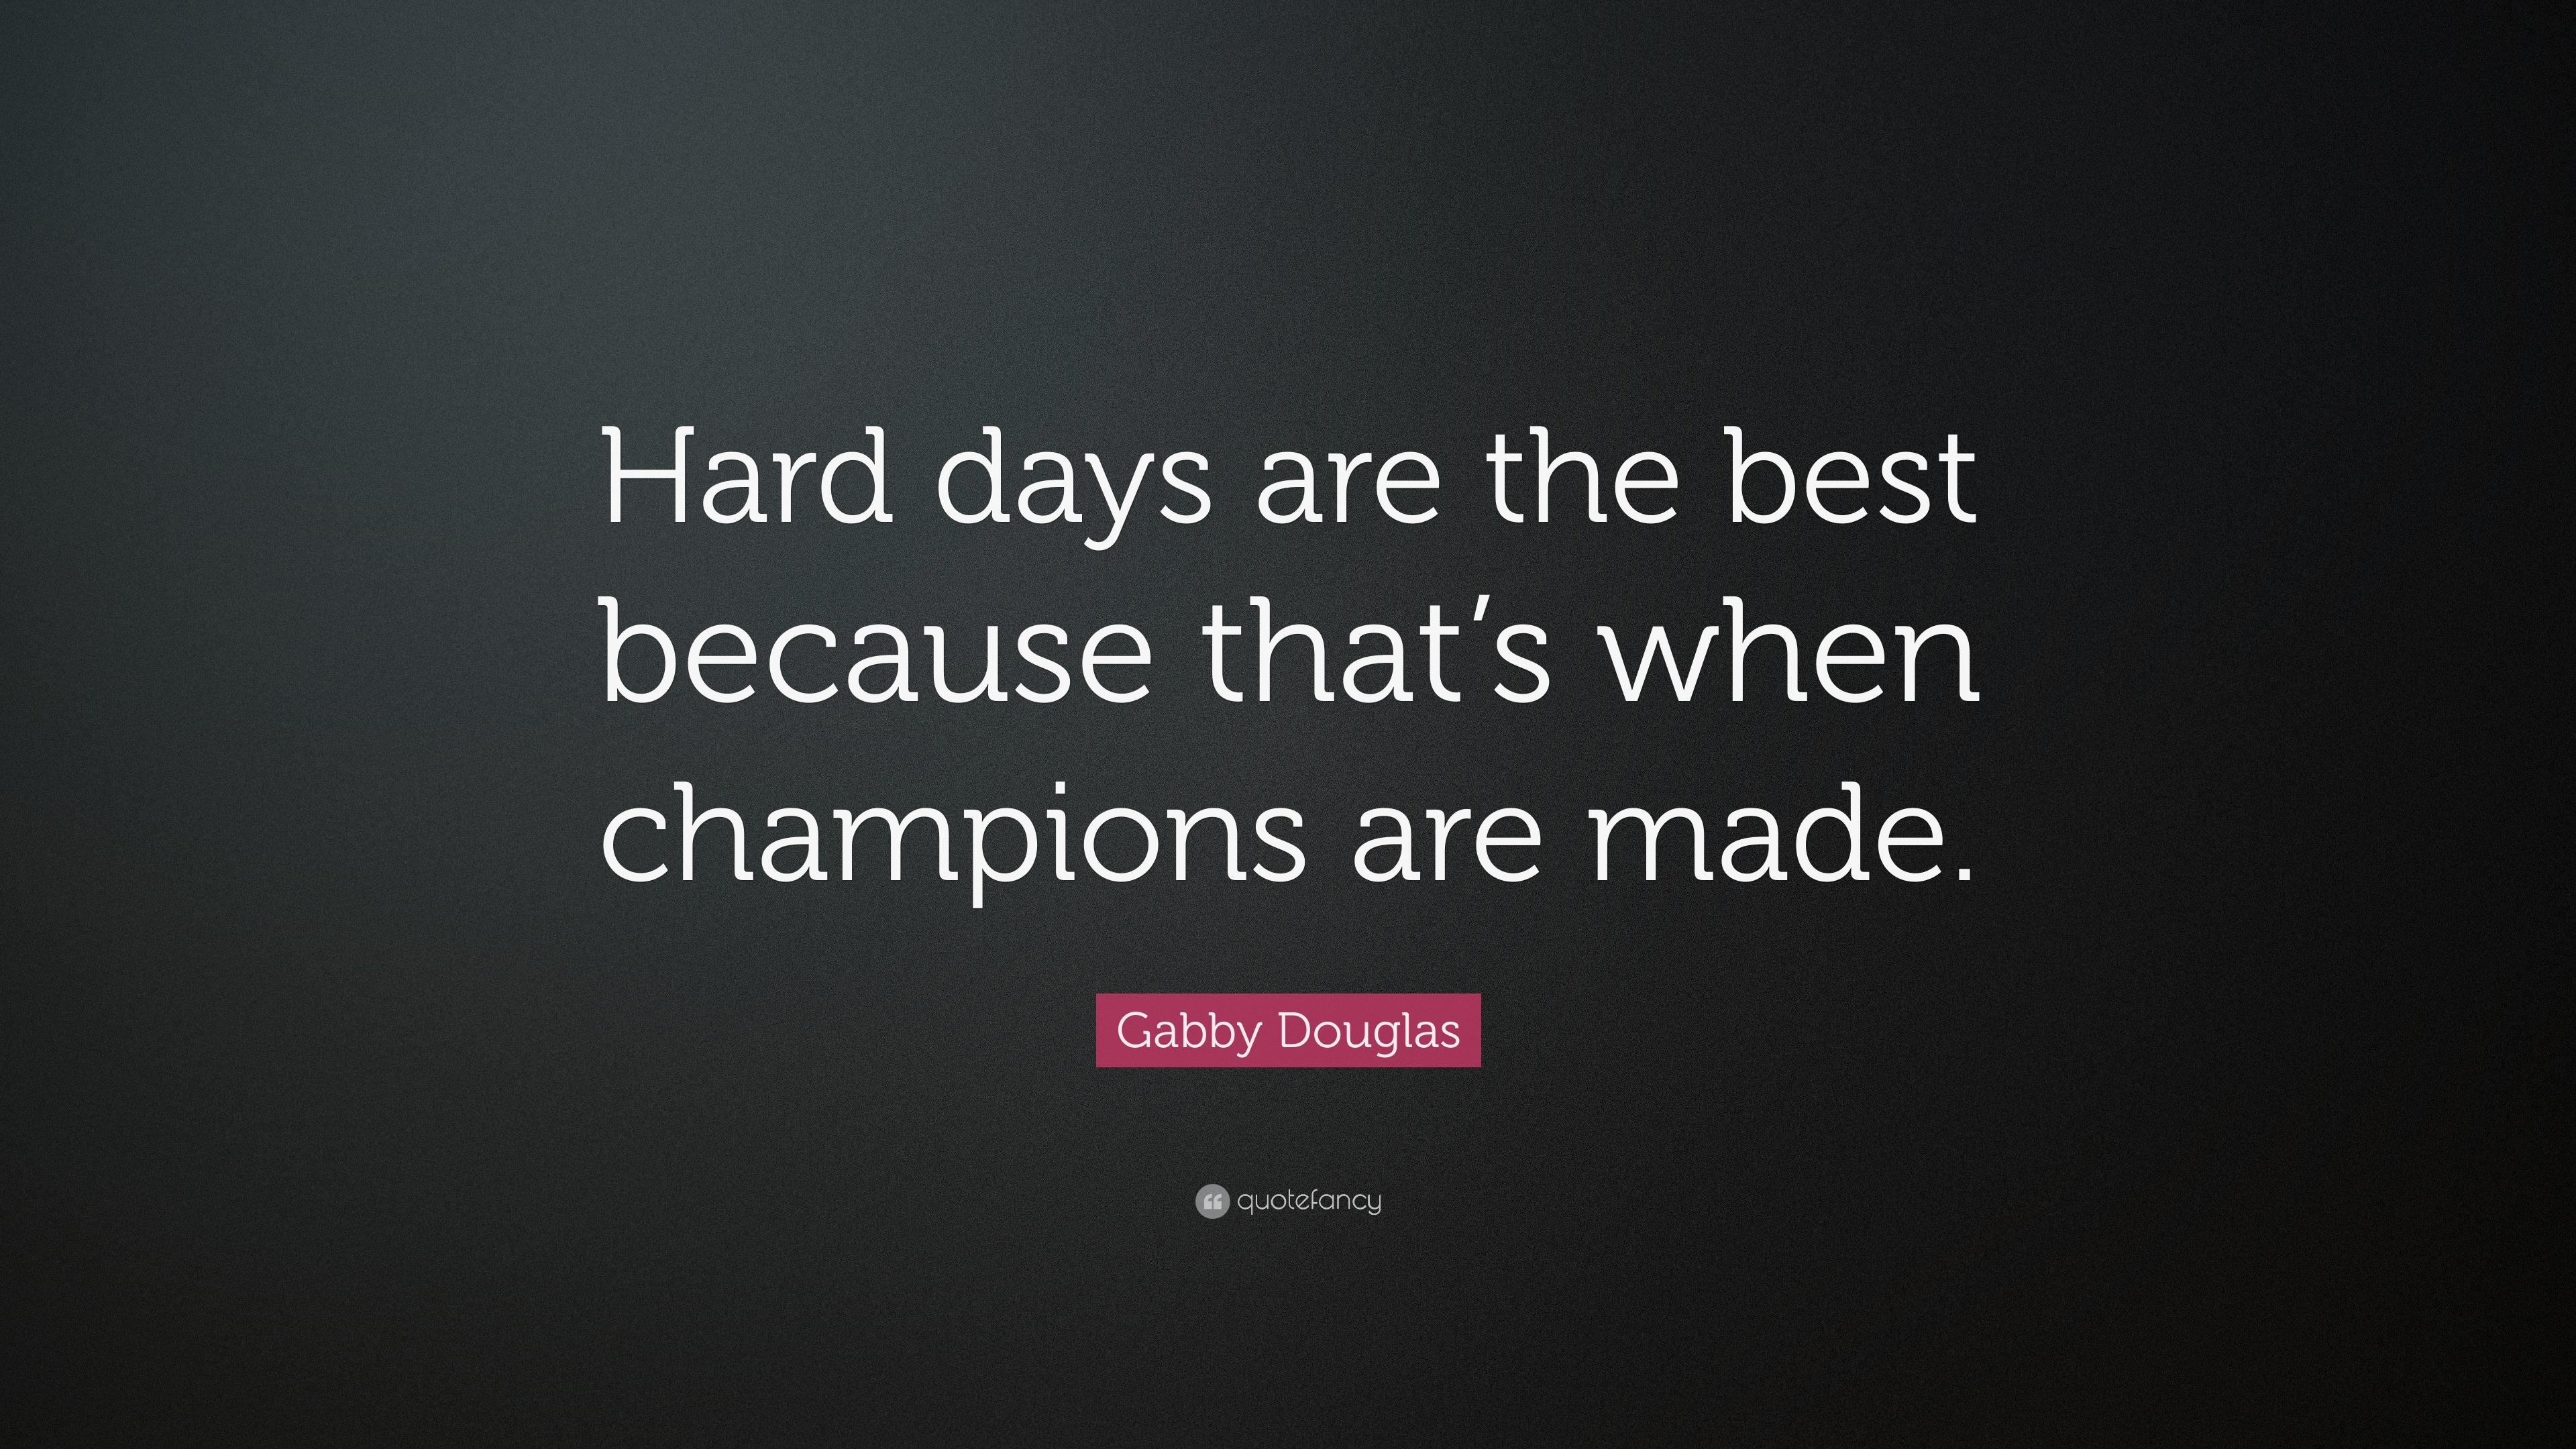 Gabby Douglas Quote “Hard days are the best because that